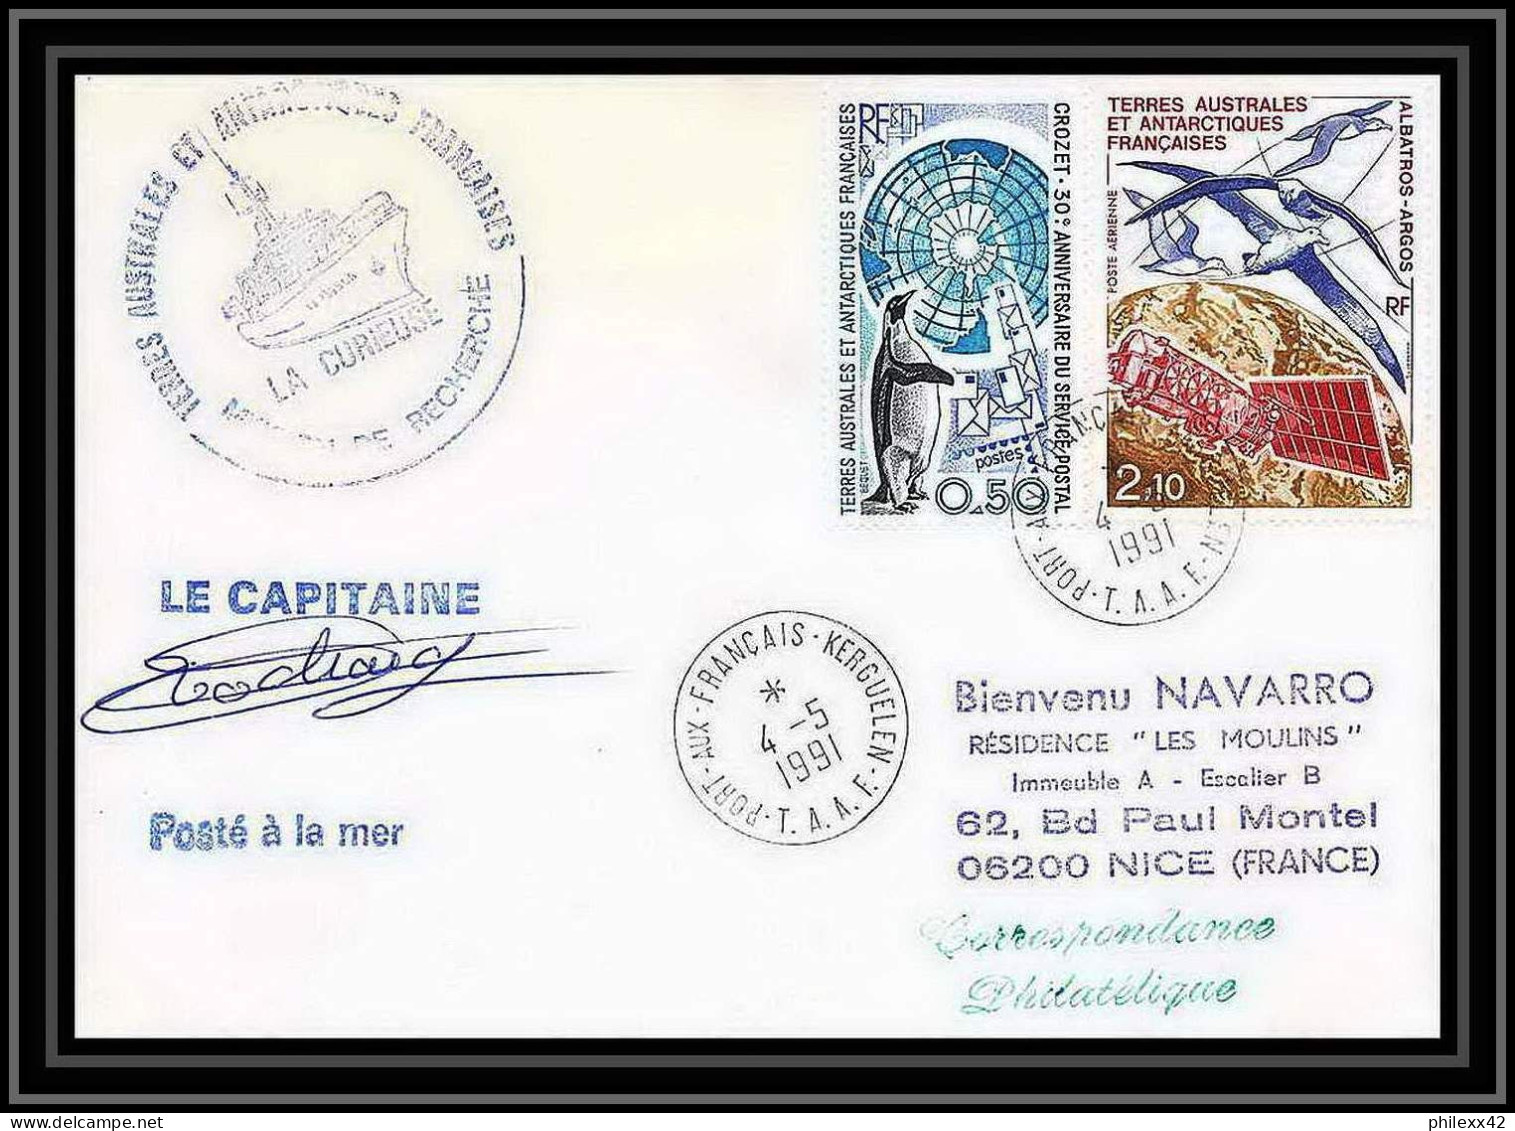 1747 Navire La Curieuse Signé Signed 4/5/1991 TAAF Antarctic Terres Australes Lettre (cover) - Antarktis-Expeditionen